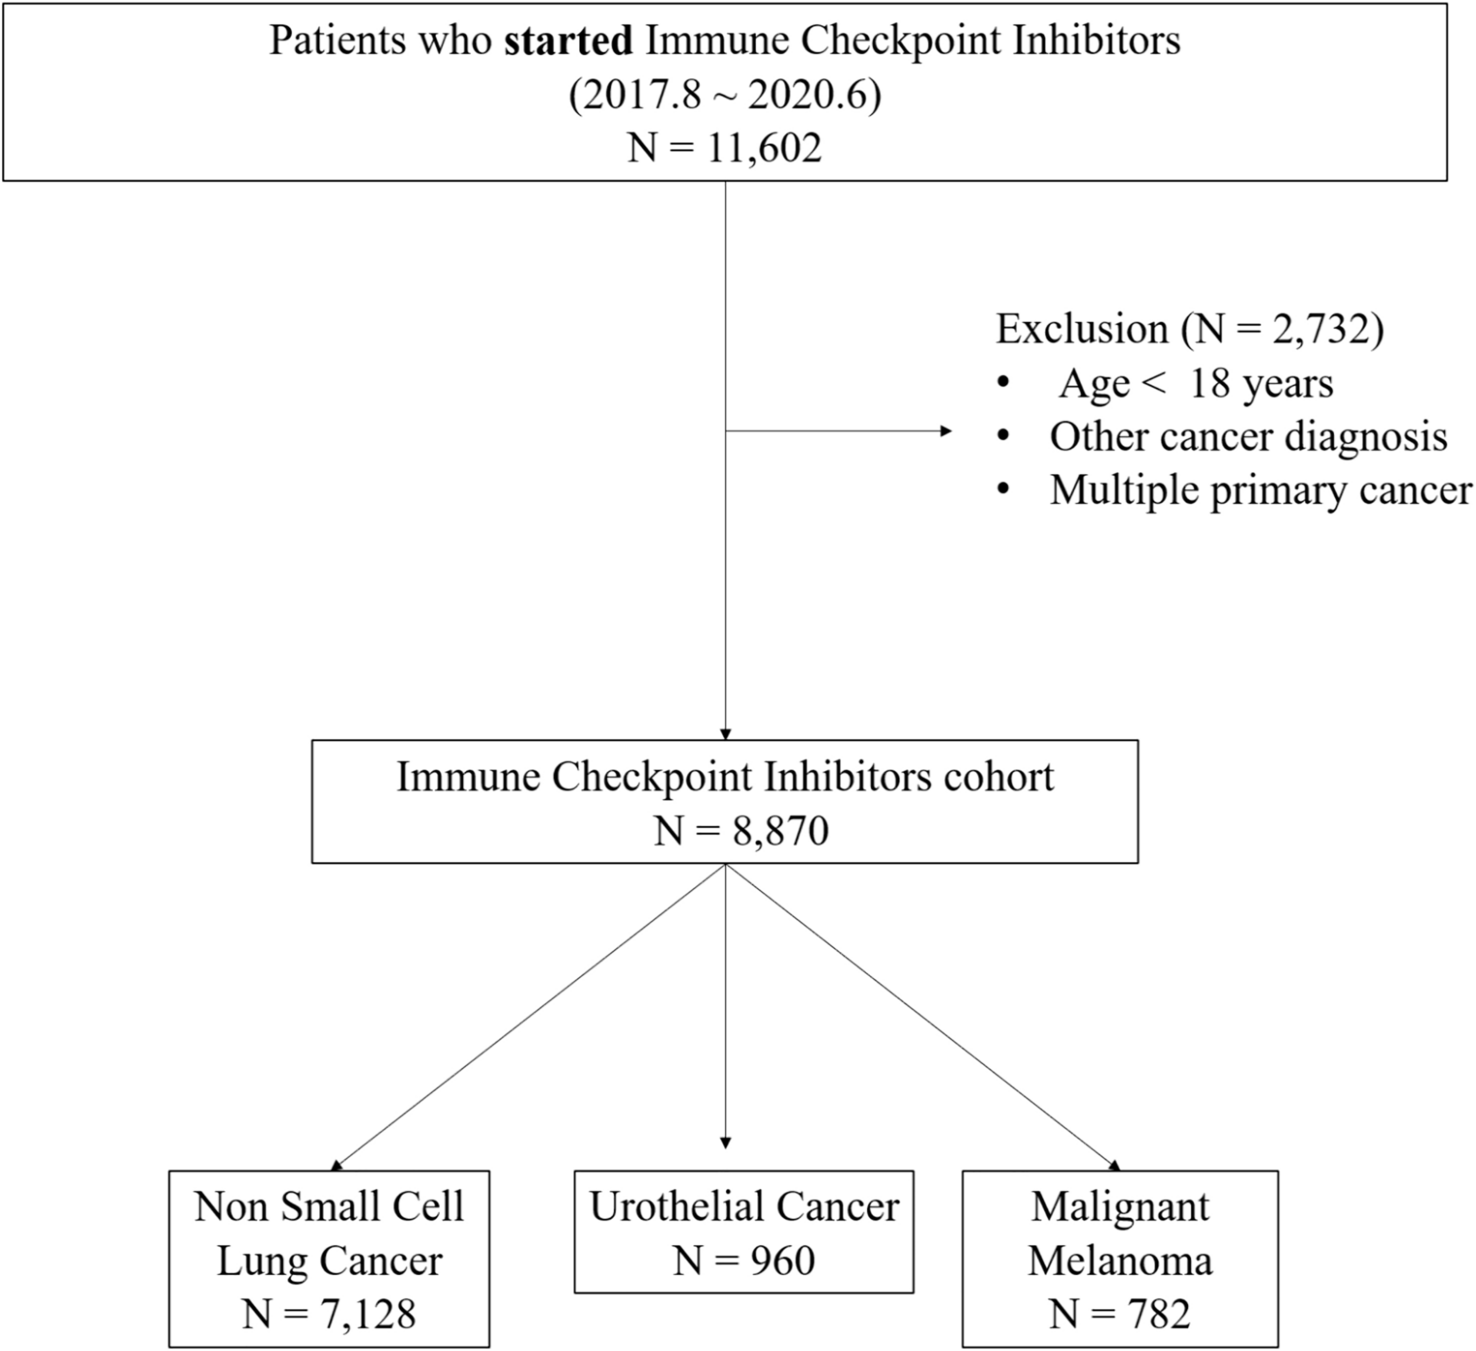 Impact of concurrent medications on clinical outcomes of cancer patients treated with immune checkpoint inhibitors: analysis of Health Insurance Review and Assessment data